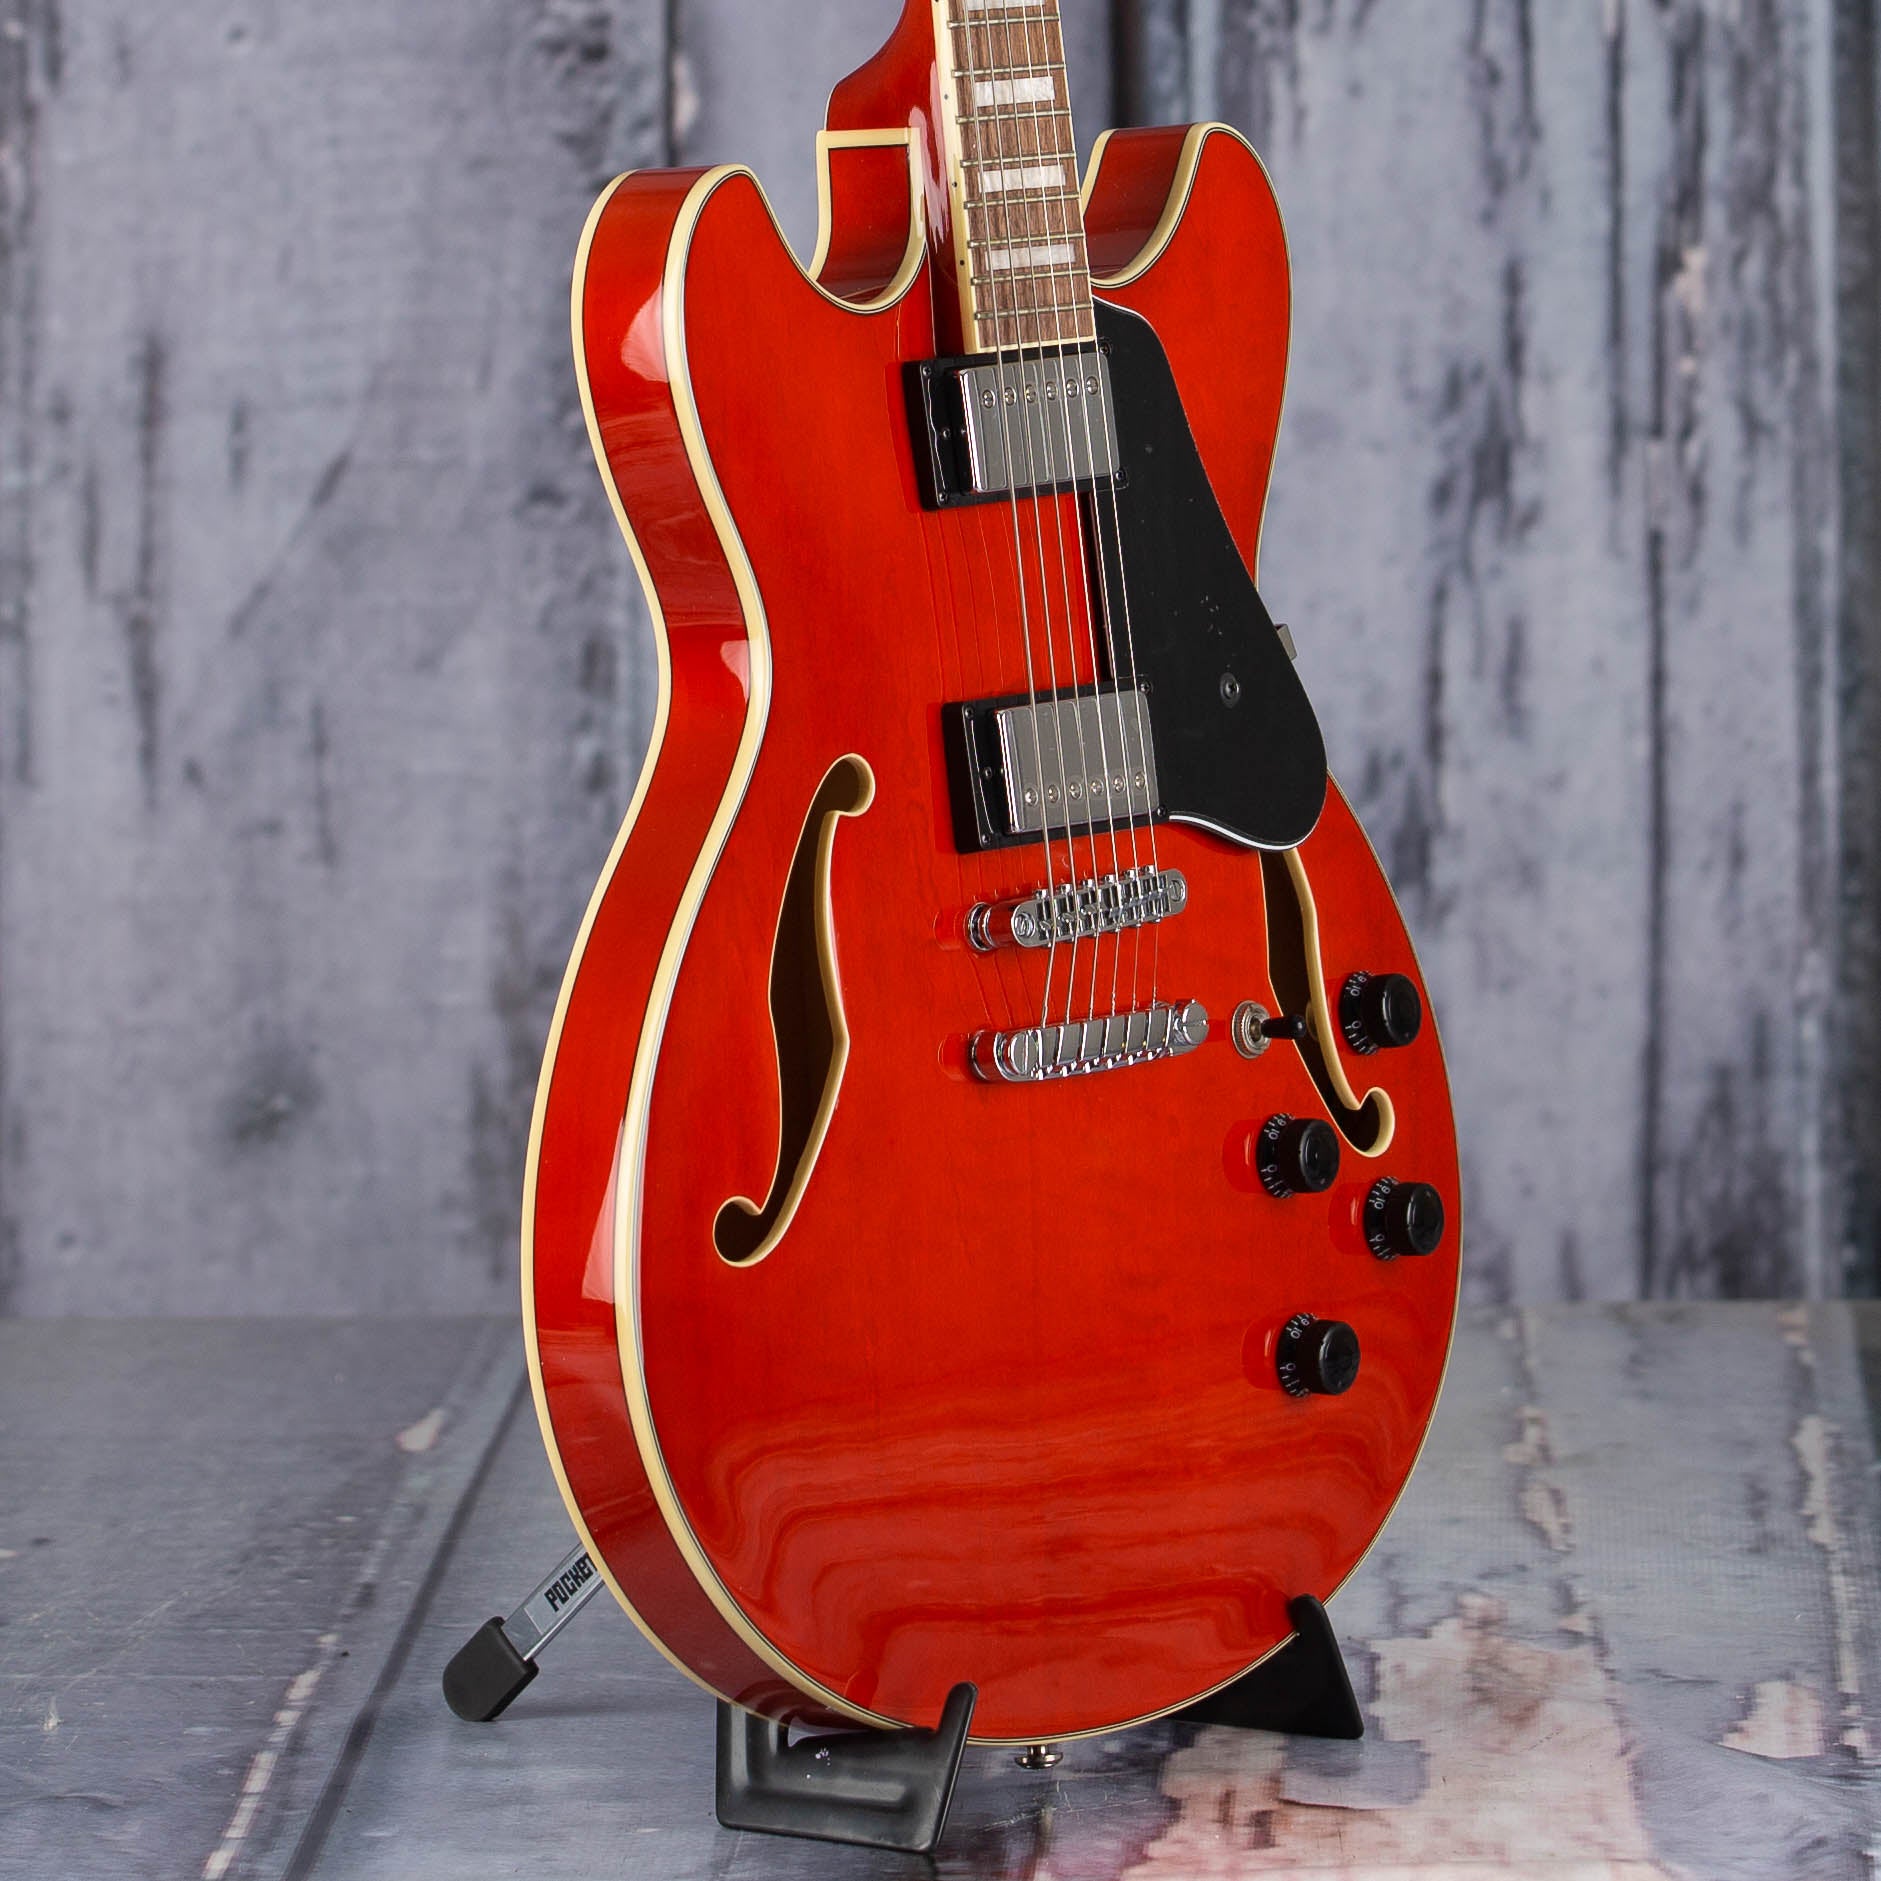 Ibanez Artcore Series AS73 Semi-Hollowbody Guitar, Transparent Cherry Red, angle